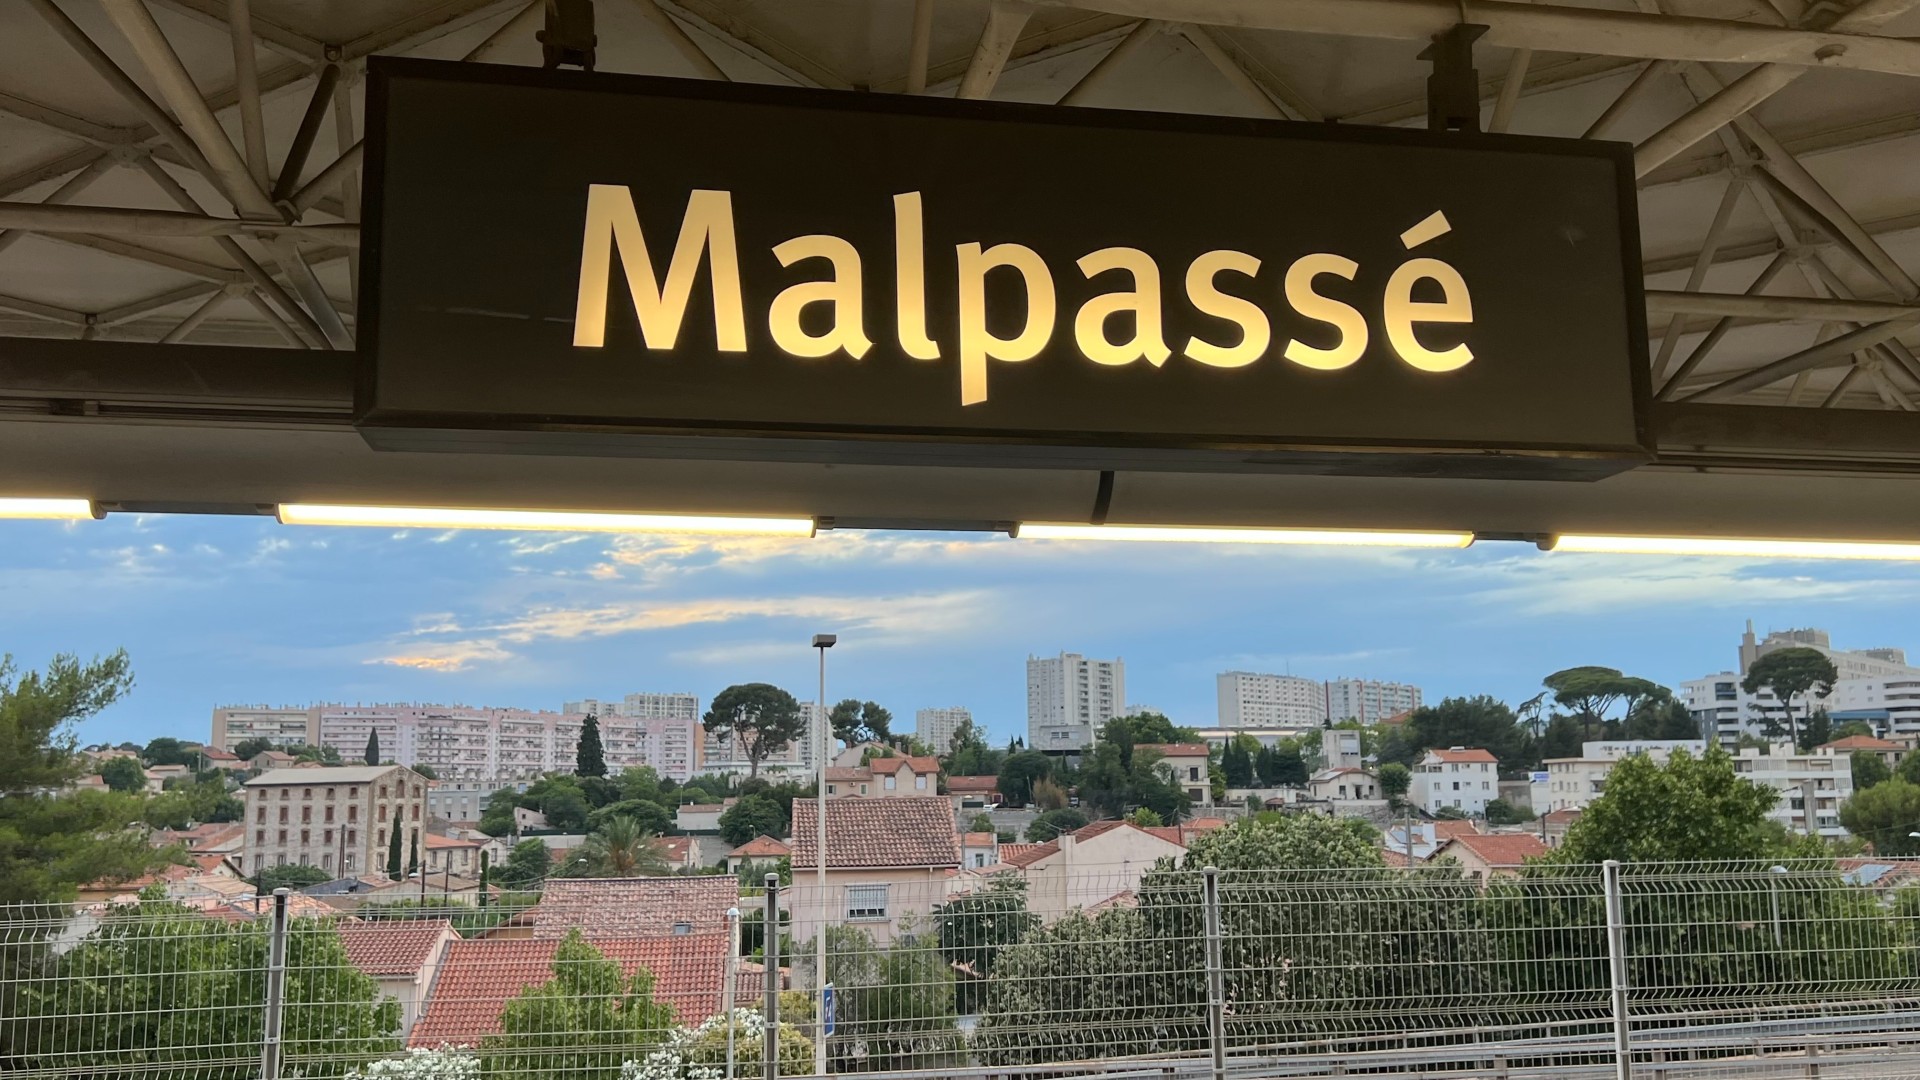 More than half of the population of Malpasse, a sprawling estate in the 13th arrondissement, live below the poverty line (MEE/Frank Andrews)